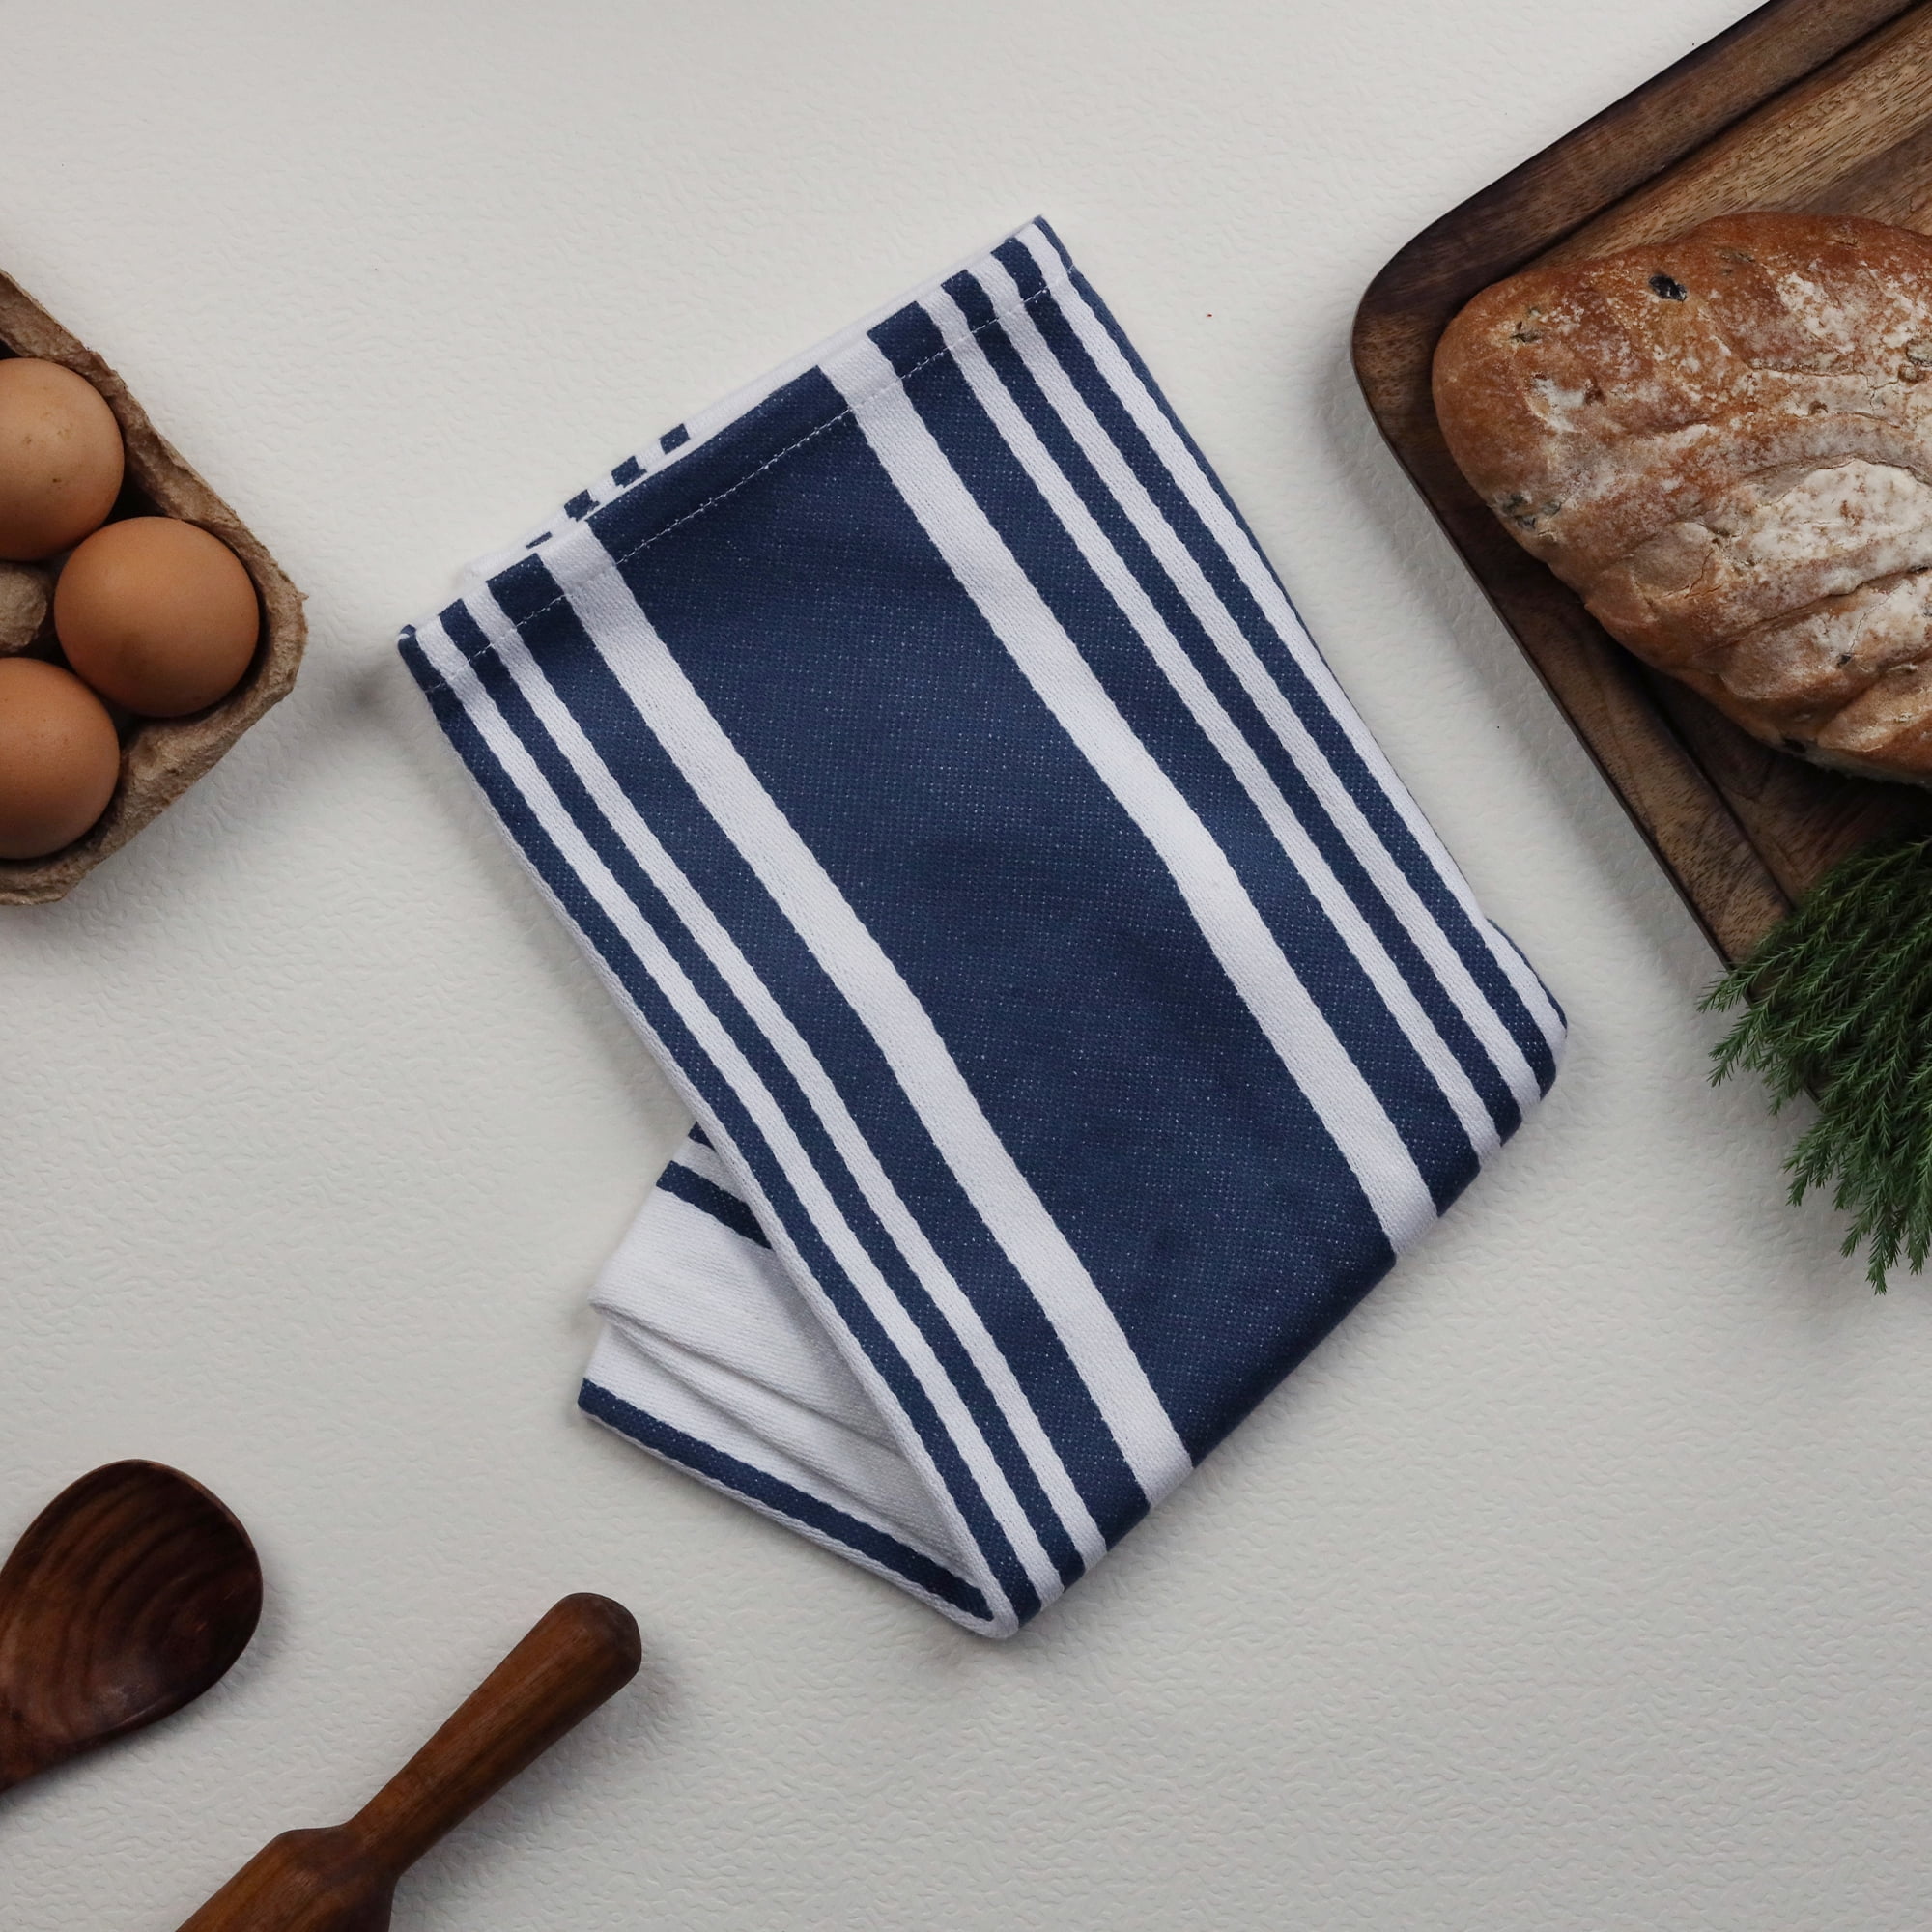 Indigo Blue White Stripe Set of 4 Kitchen Dish Towels 20x30 inch Extra Large Highly Absorbent 100% Cotton Hand Towel Mitered Corners for Bar & Tea